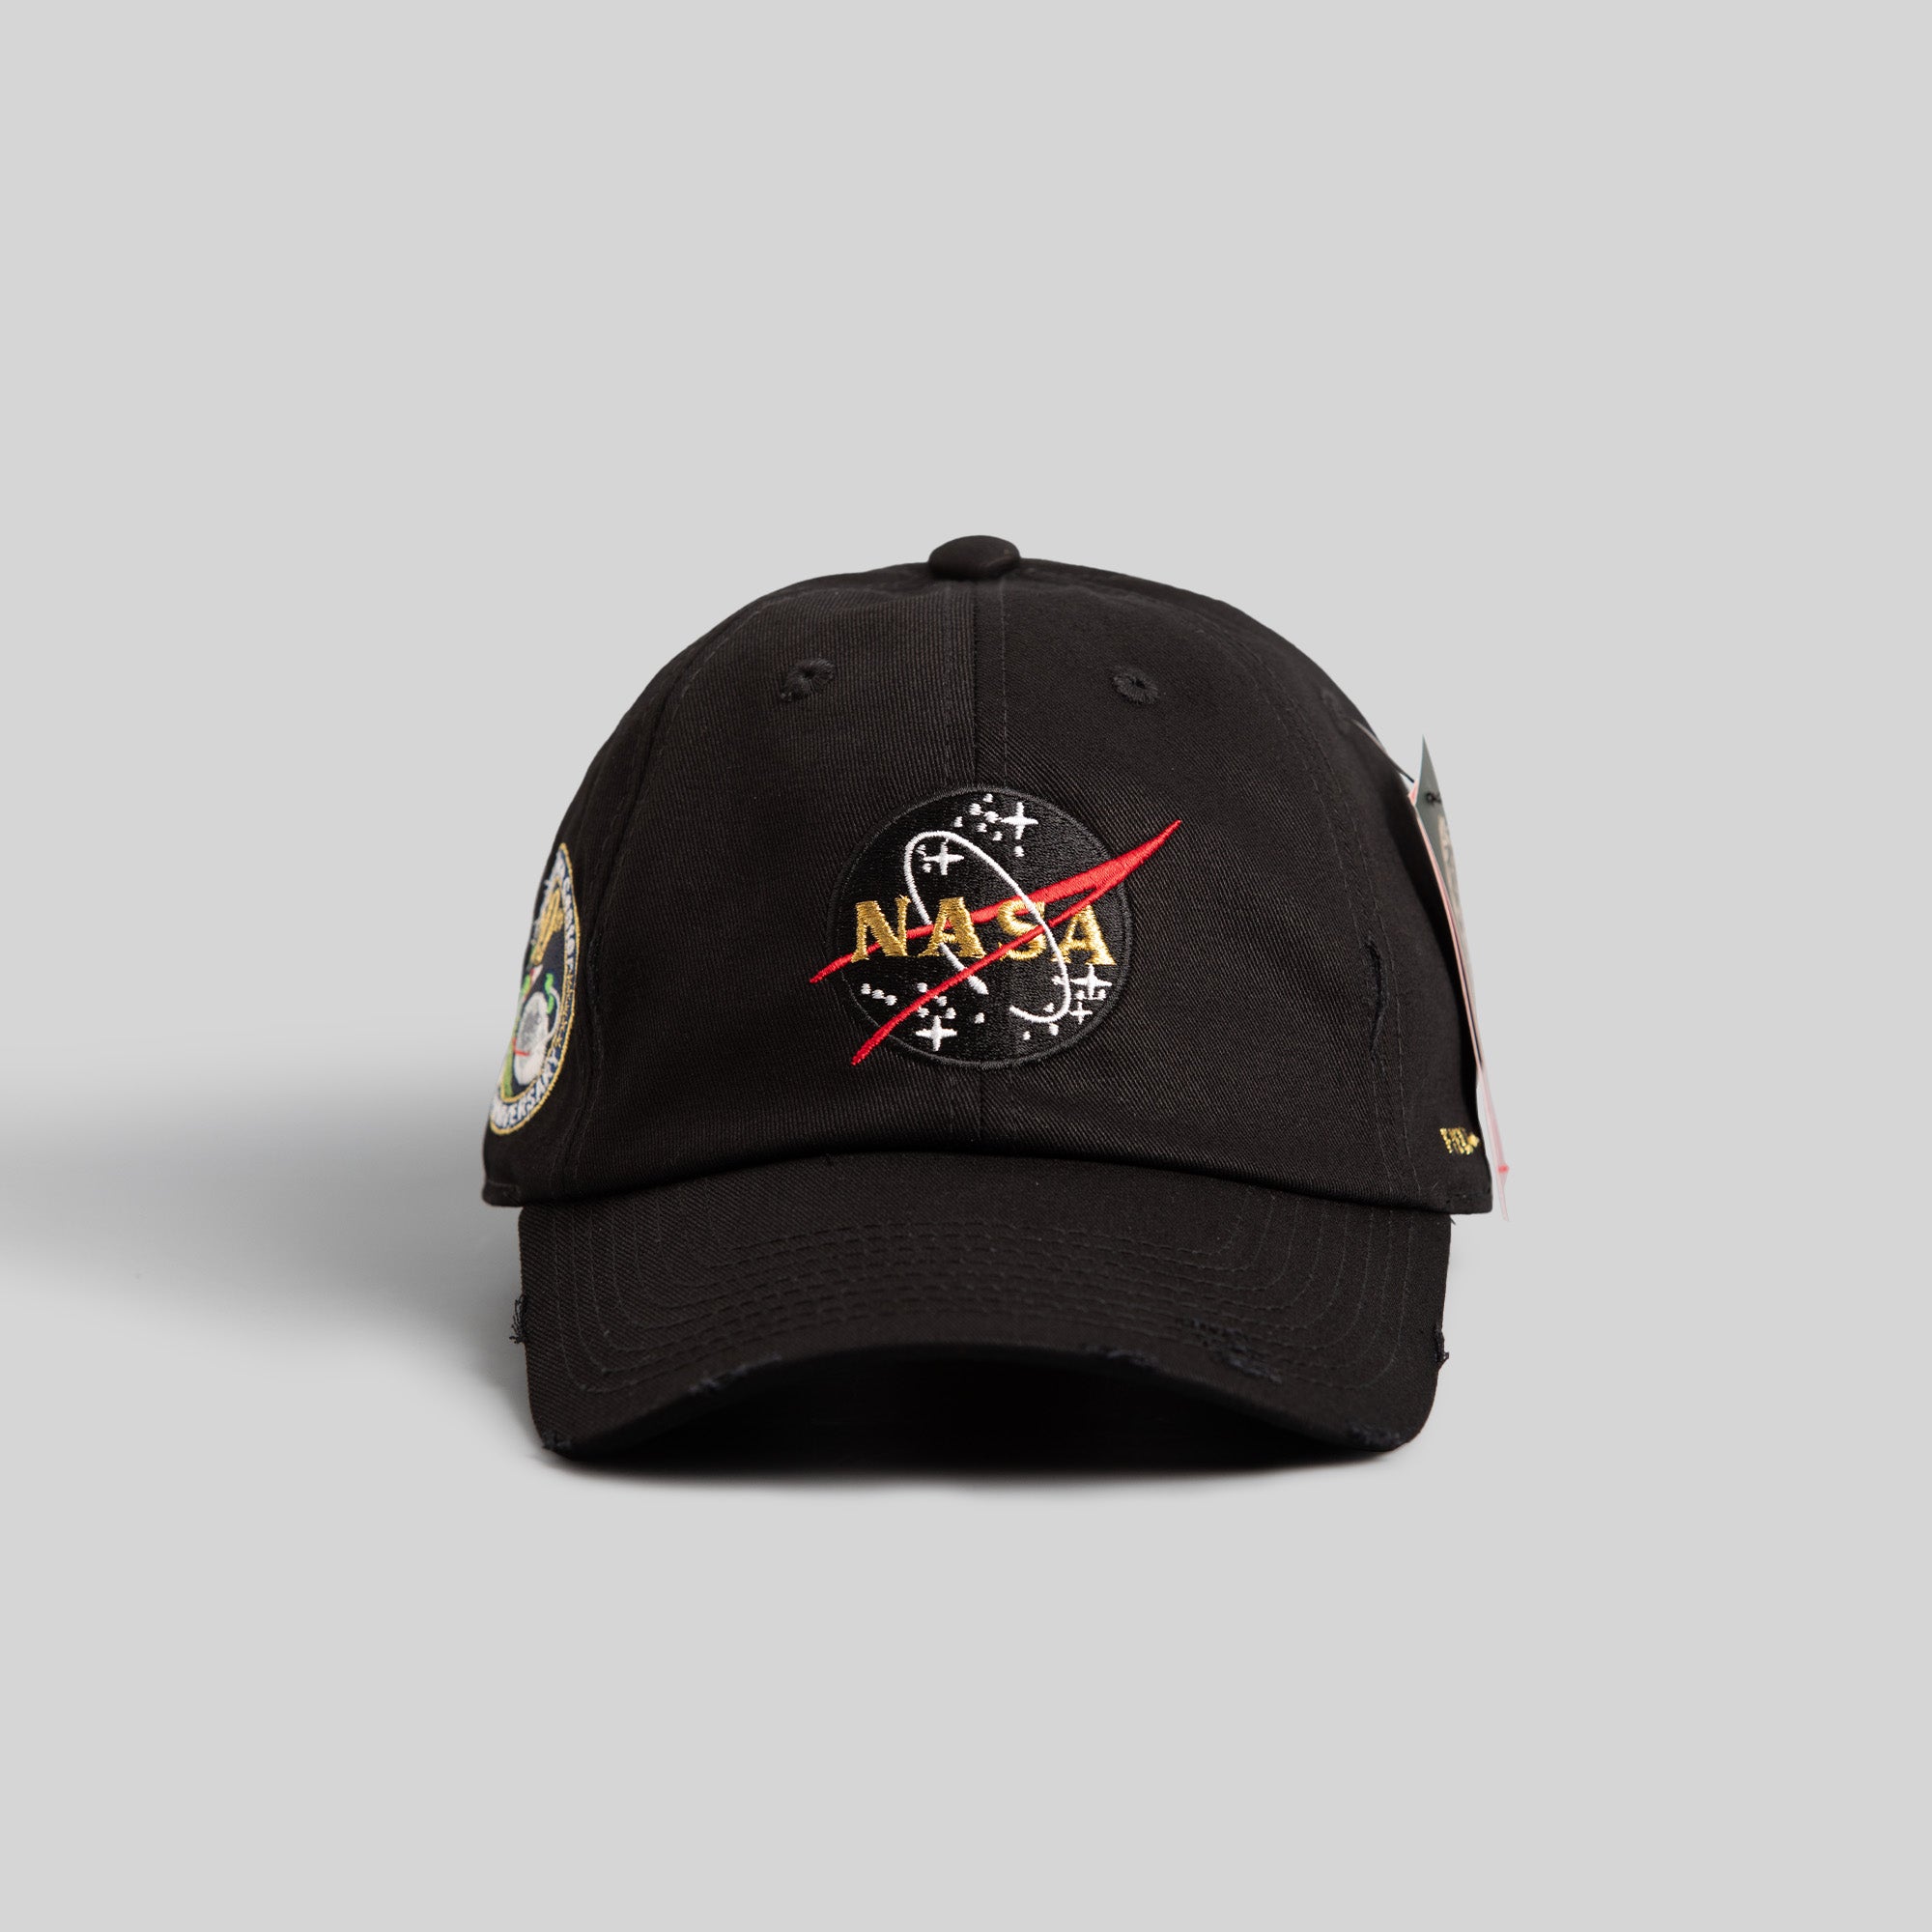 SKYLAB NASA 50TH ANNIVERSARY BLACK DISTRESSED RELAXED FIT HAT